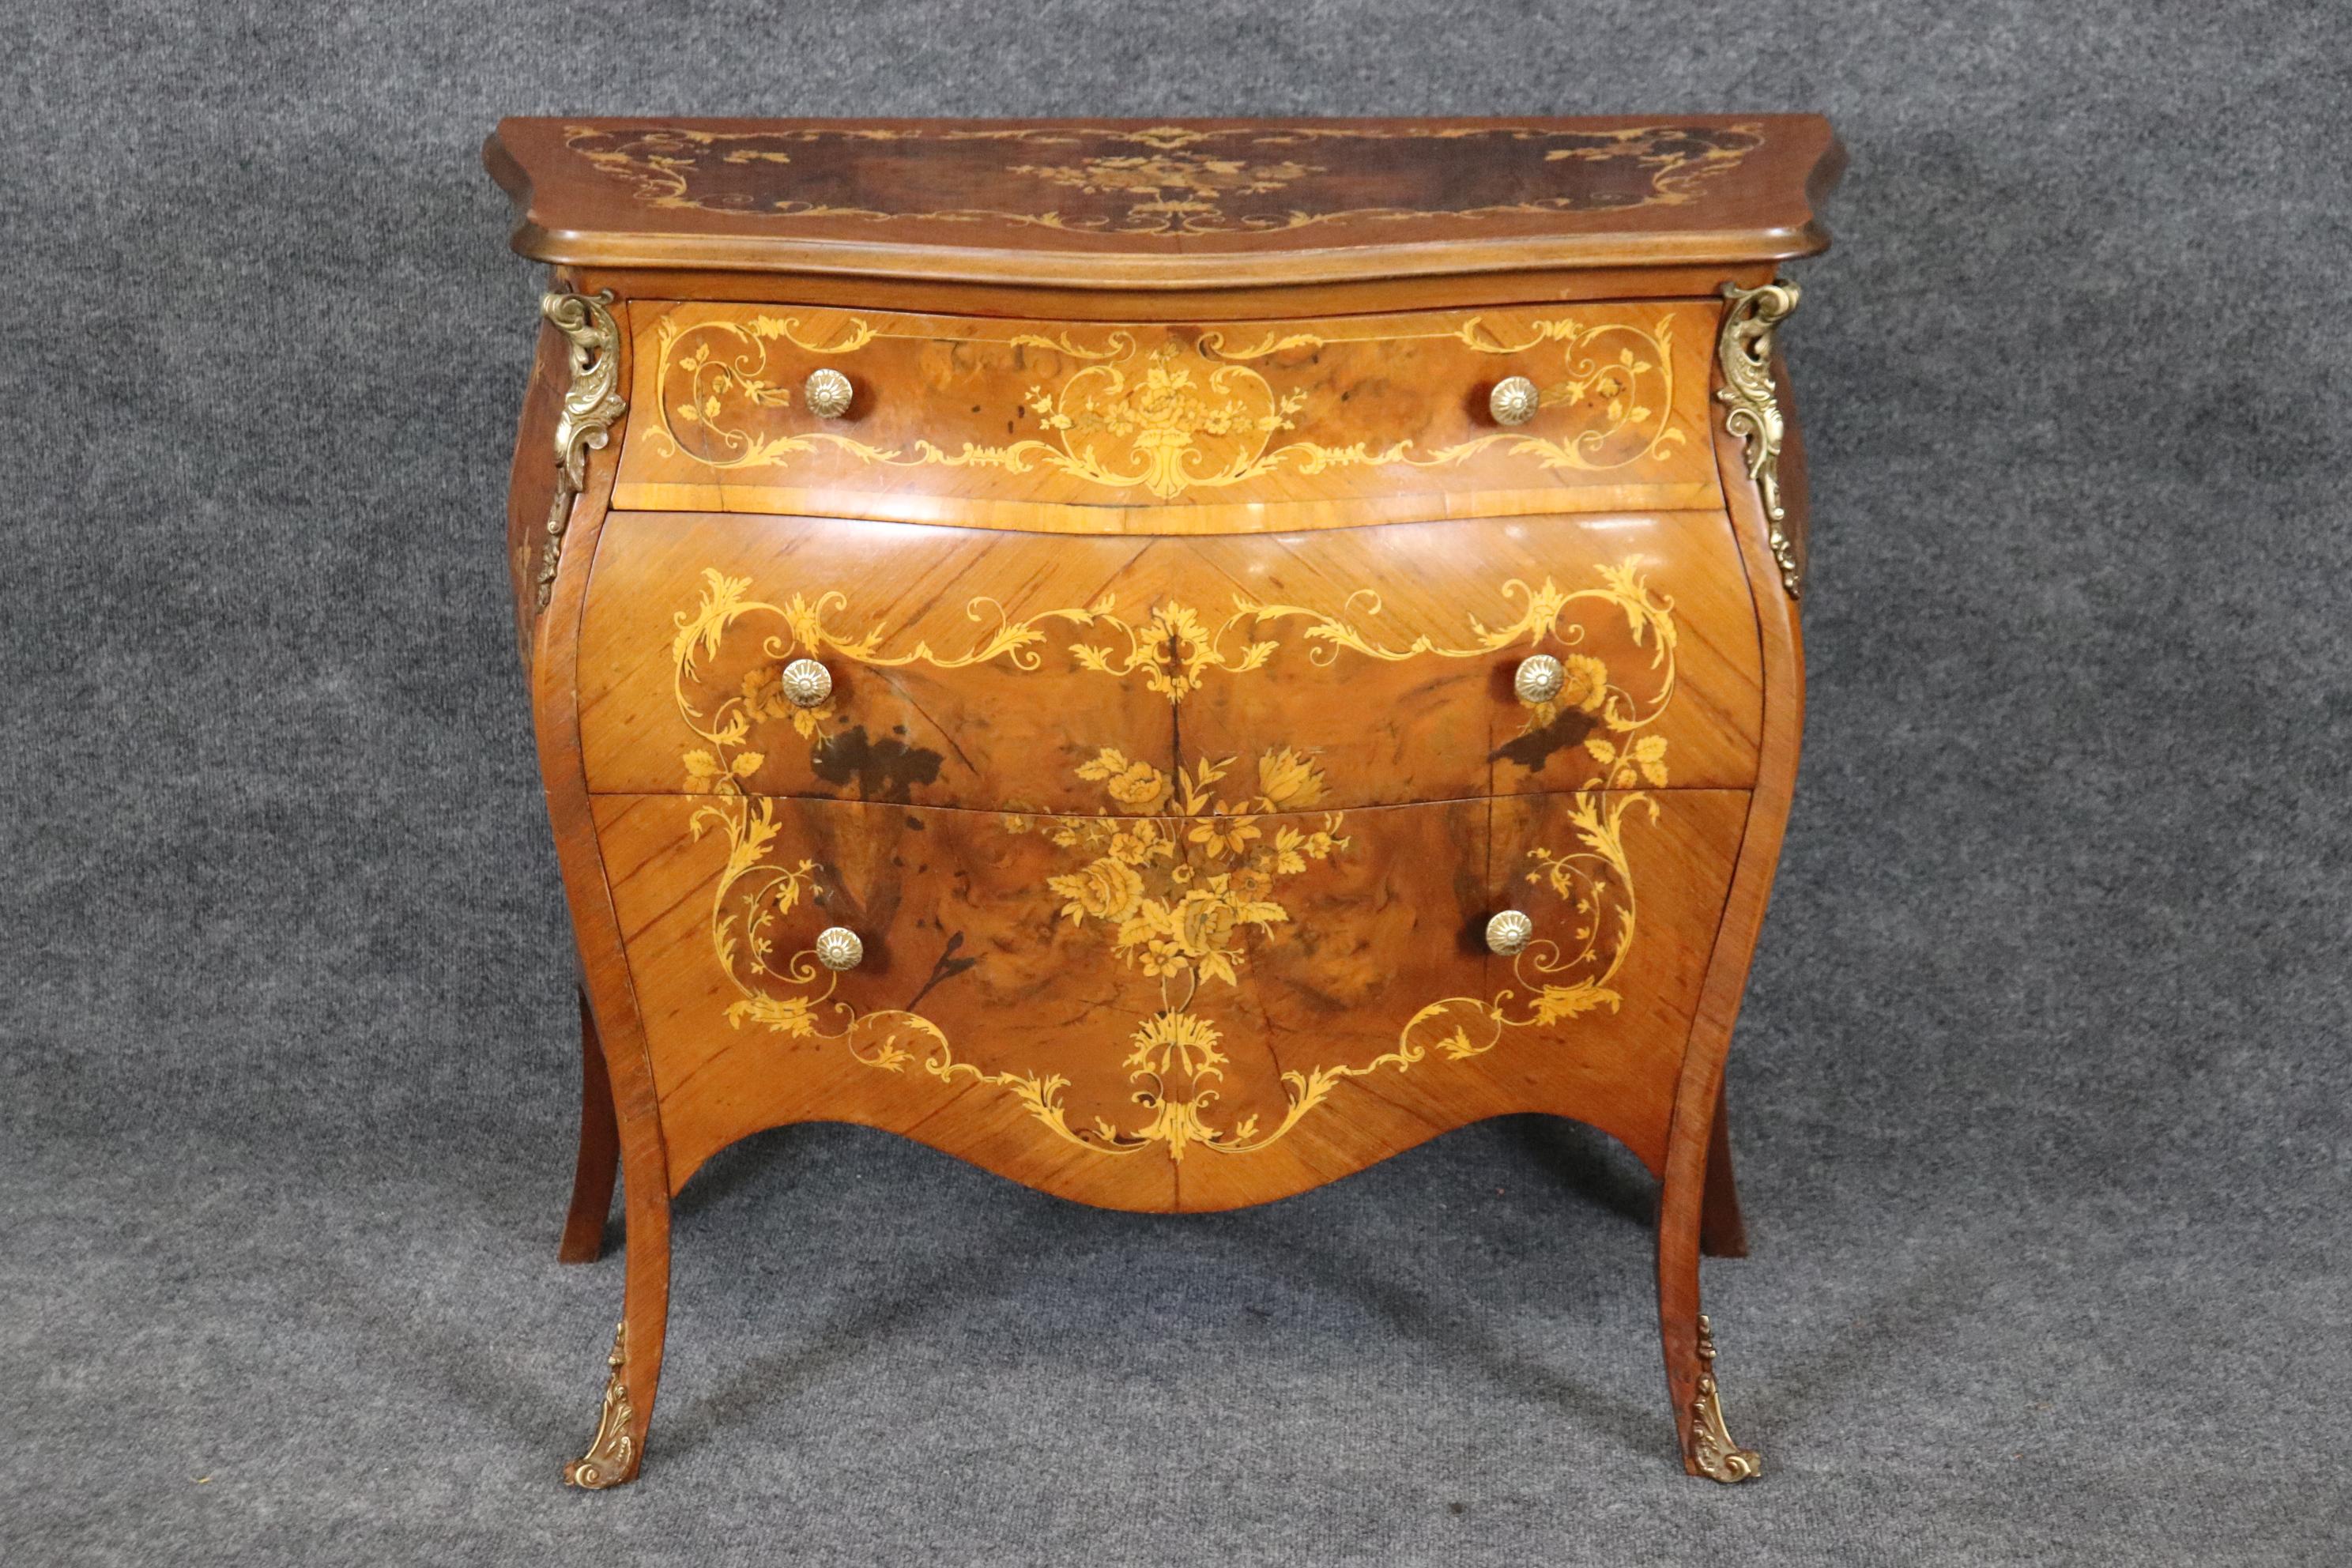 Highly Decorated Bronze Mounted Inlaid Fancy Italian Bombe Form Commode Chest  In Good Condition For Sale In Swedesboro, NJ